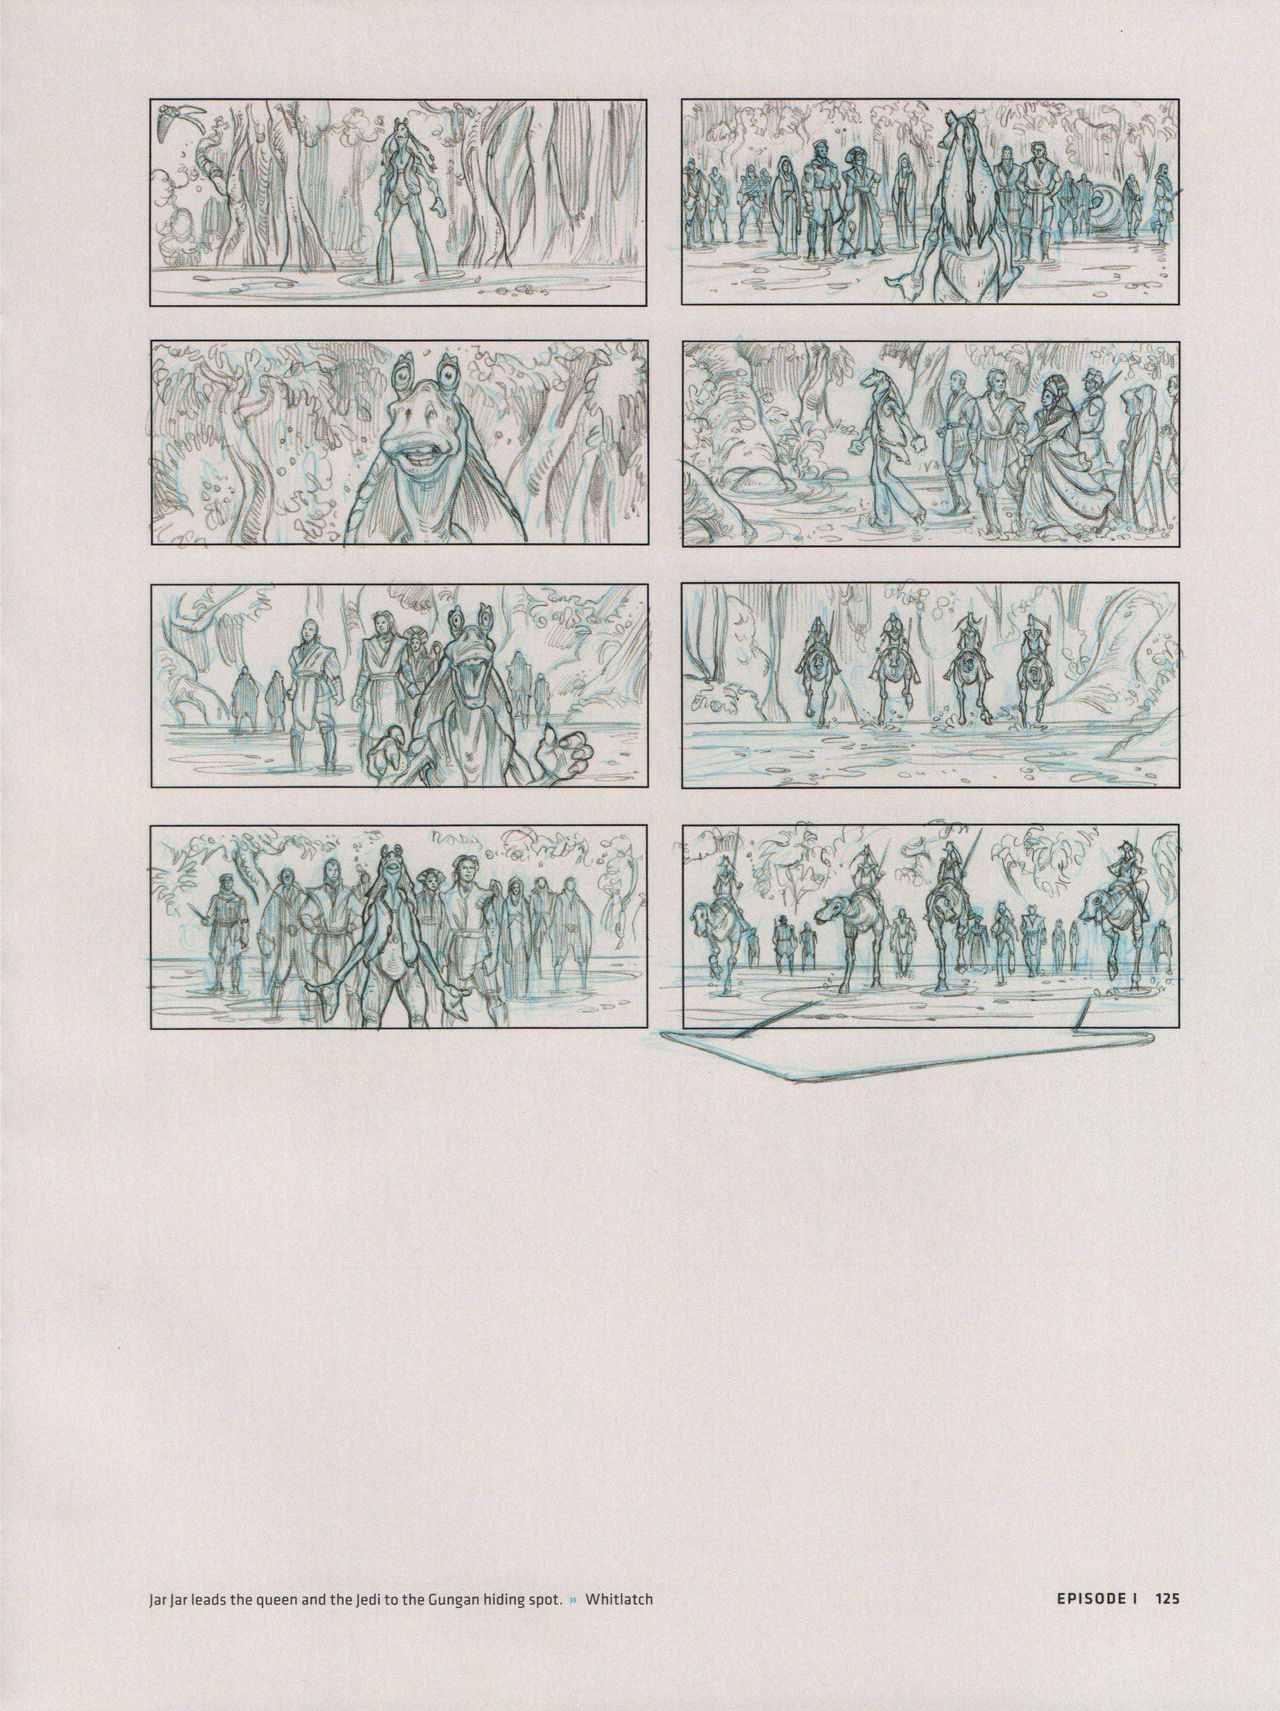 Star Wars Storyboards - The Prequel Trilogy 129